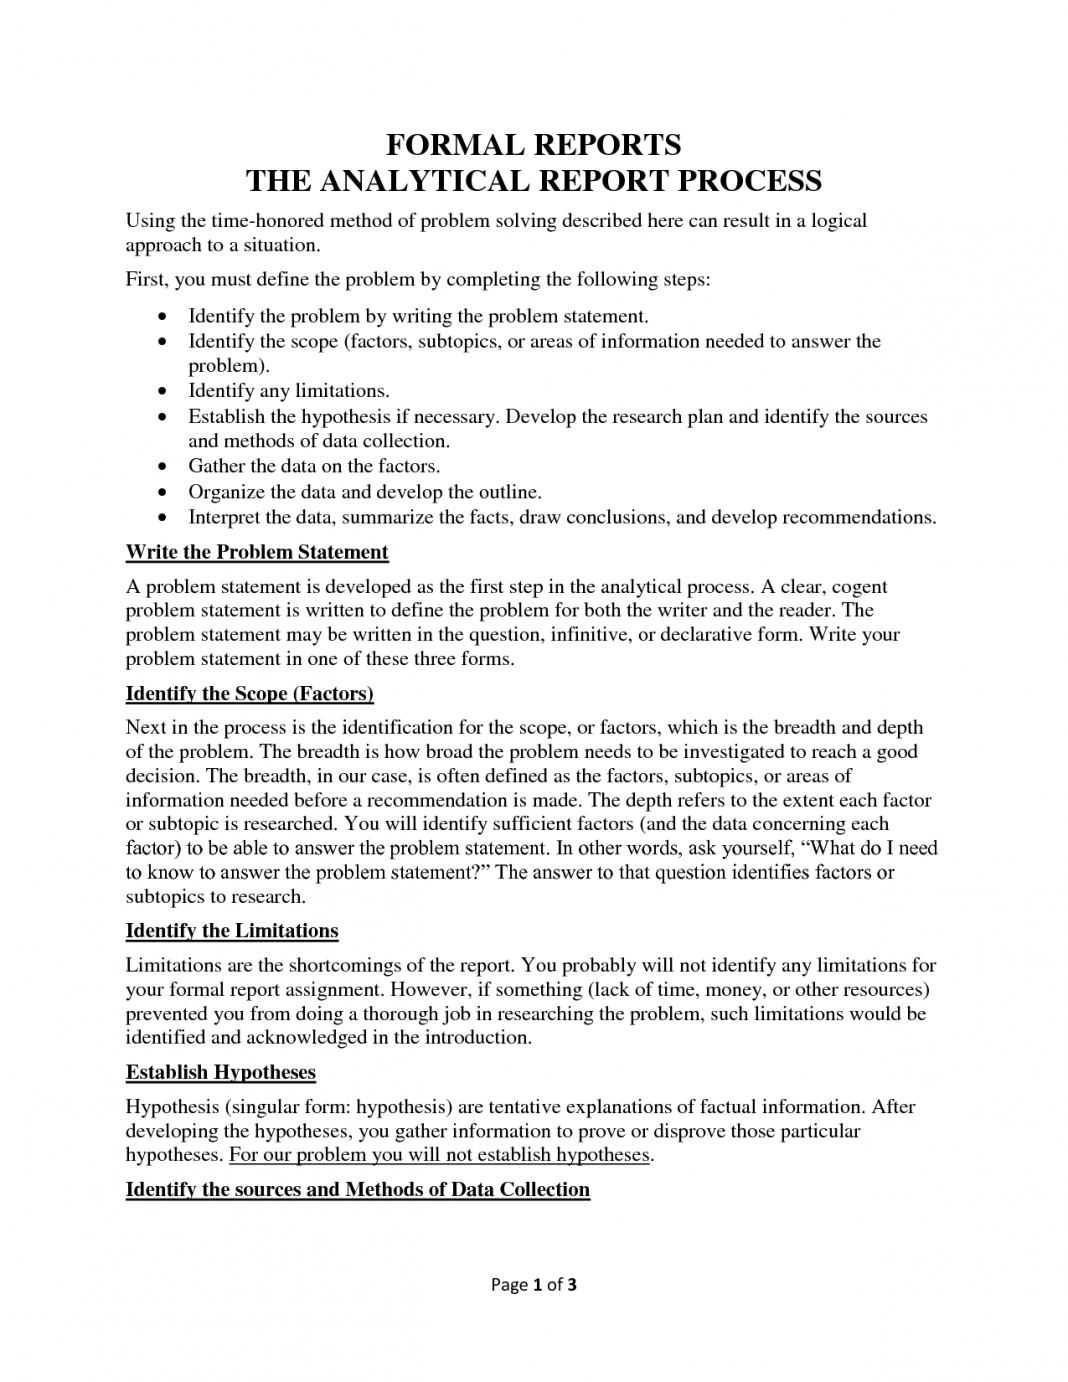 Examples Of Professional Business Reports West Roanoke With Regard To Analytical Report Template